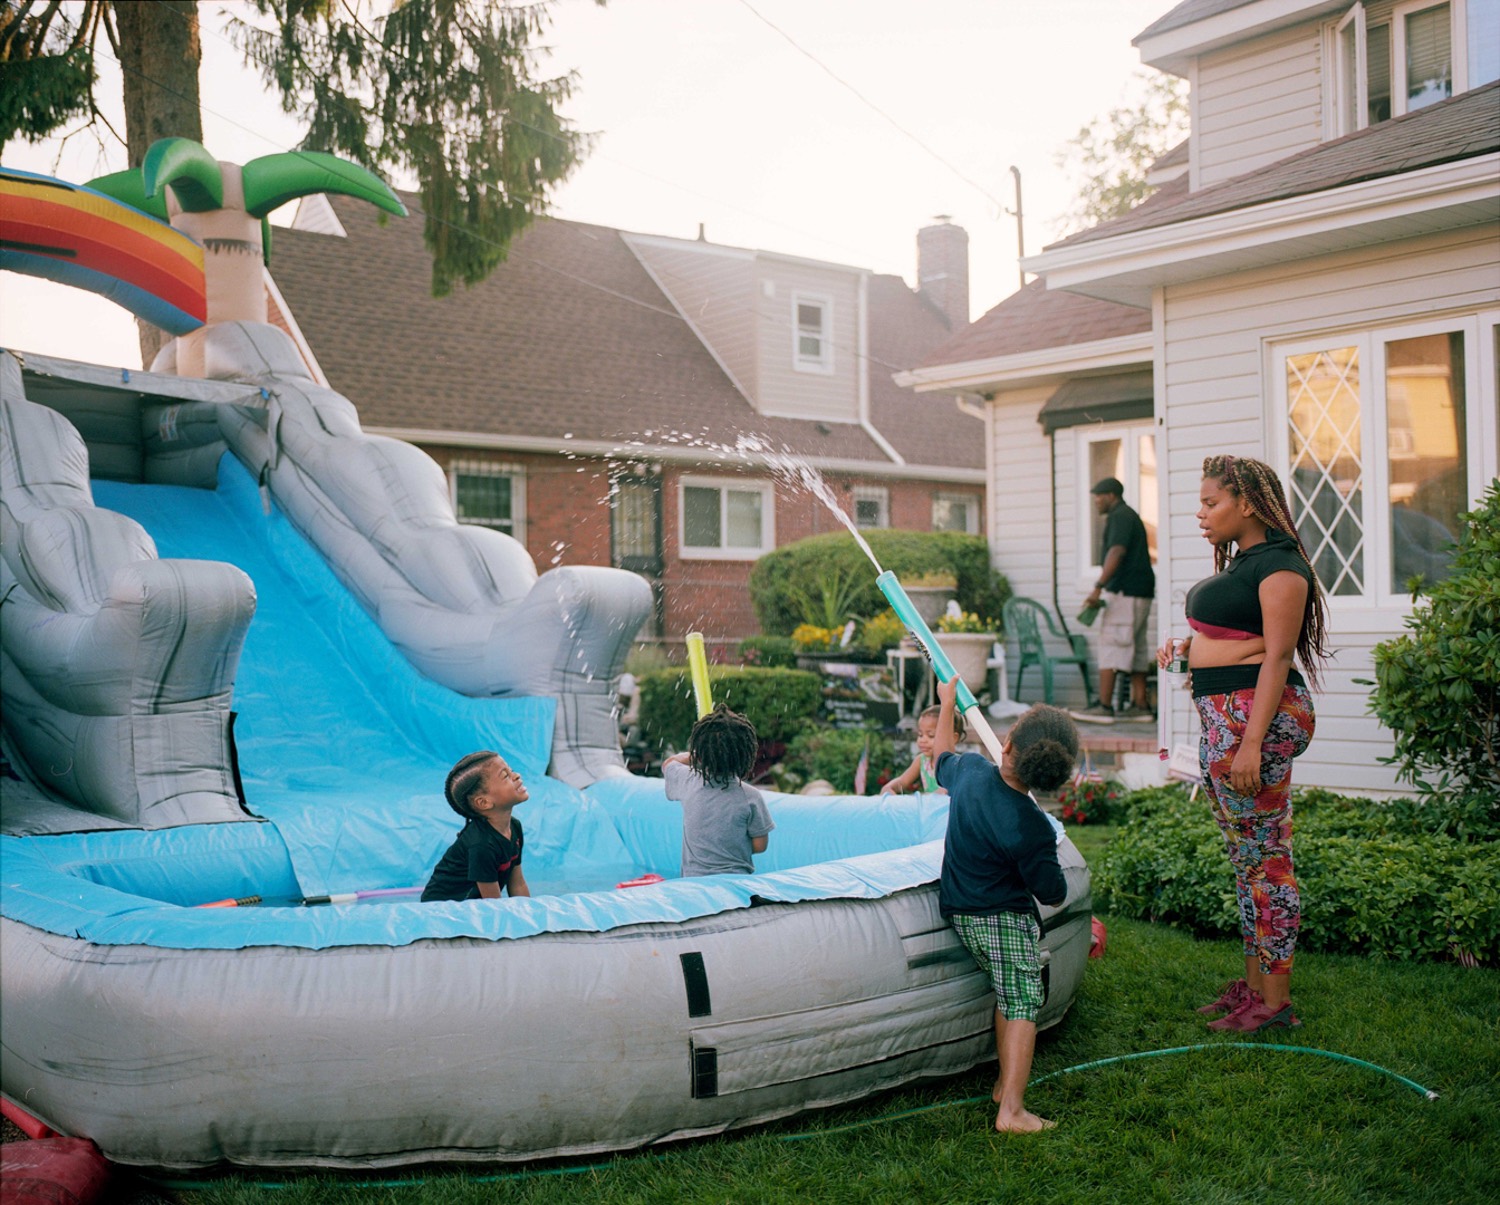 a family stands outdoors in yard playing with water toys and an inflatable water slide and pool